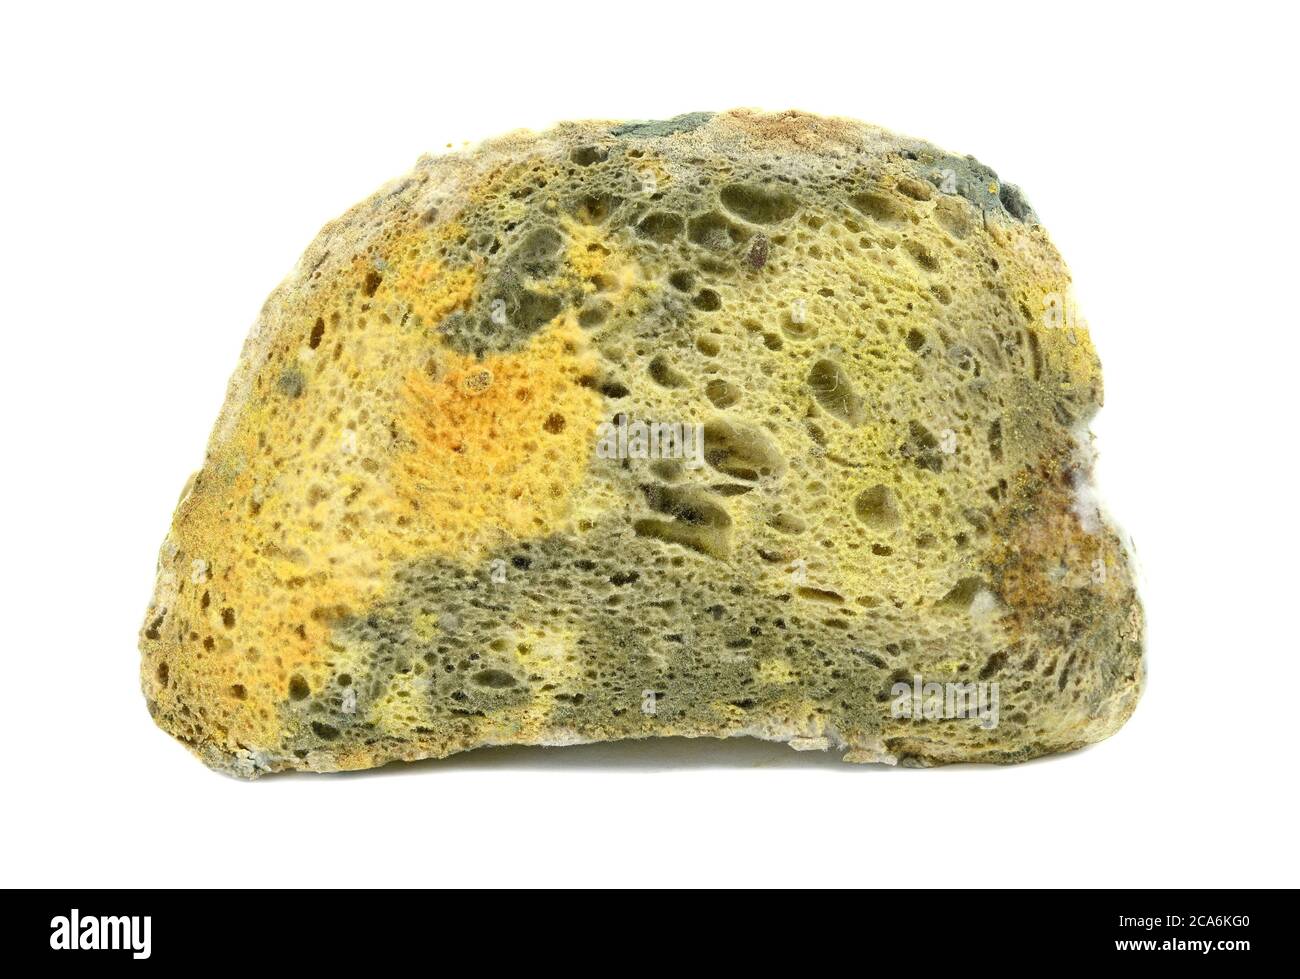 Moldy bread, isolated on white background Stock Photo